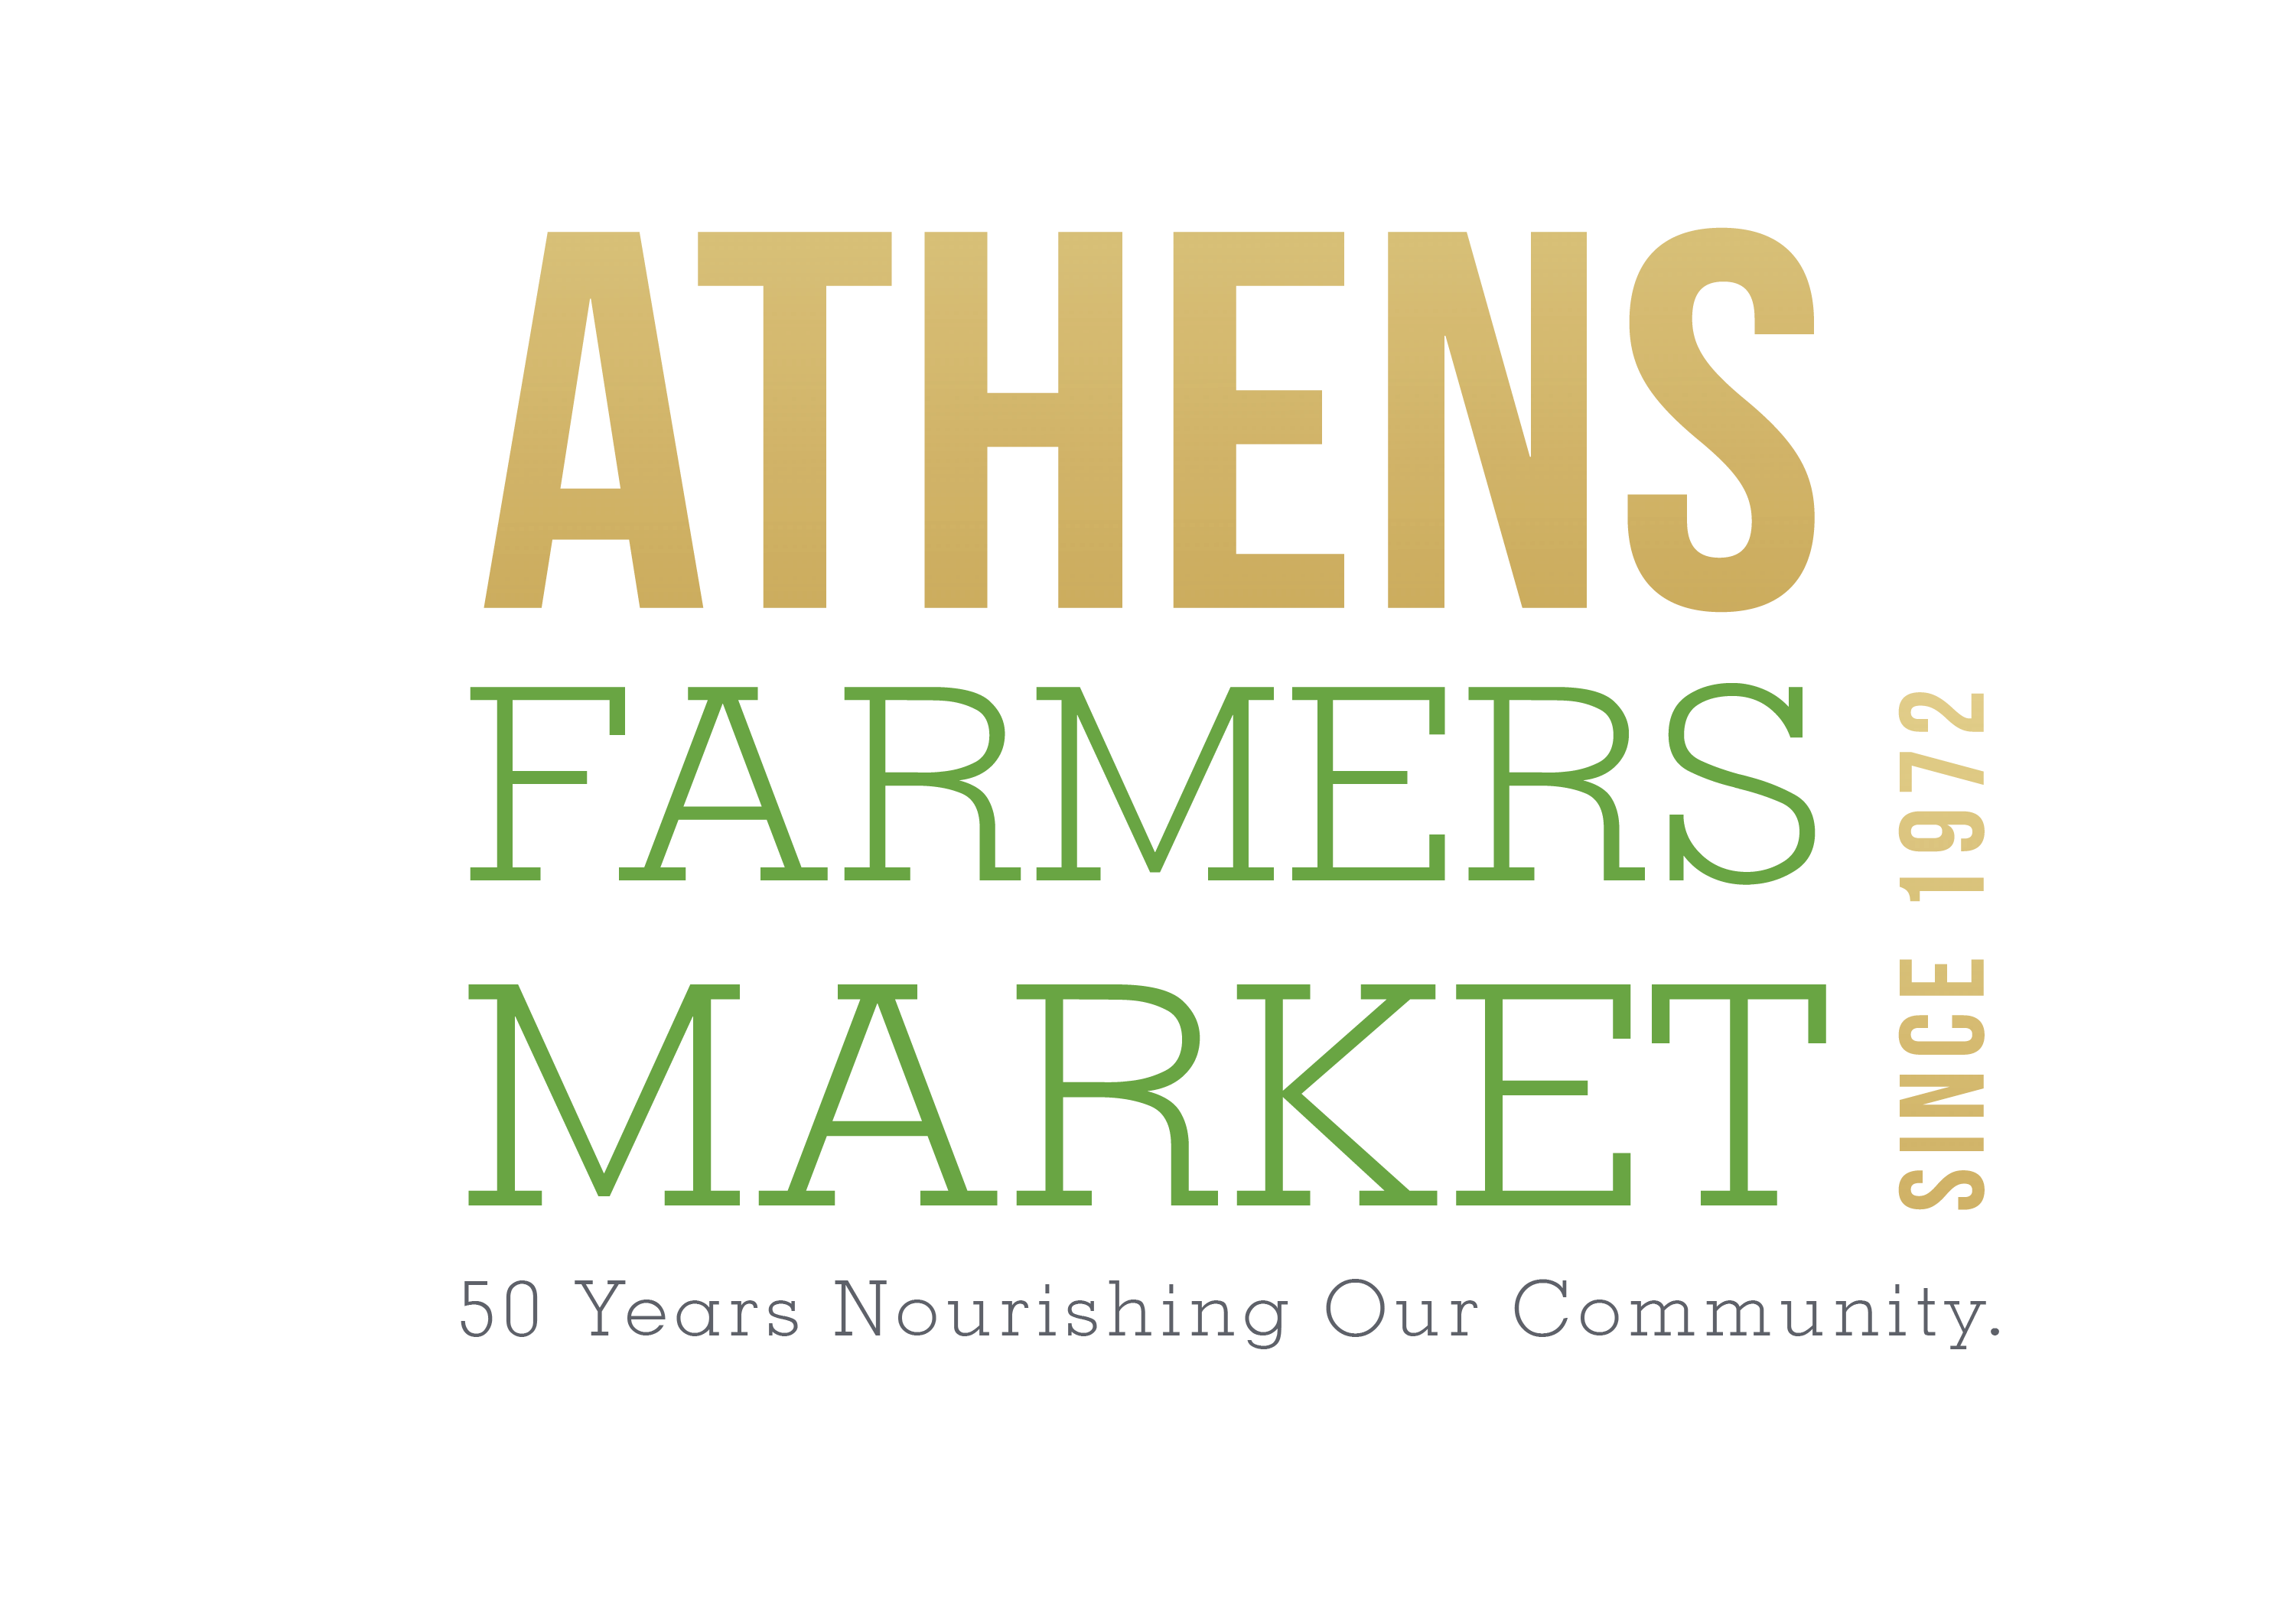 The logo for the Athens Farmer's Market